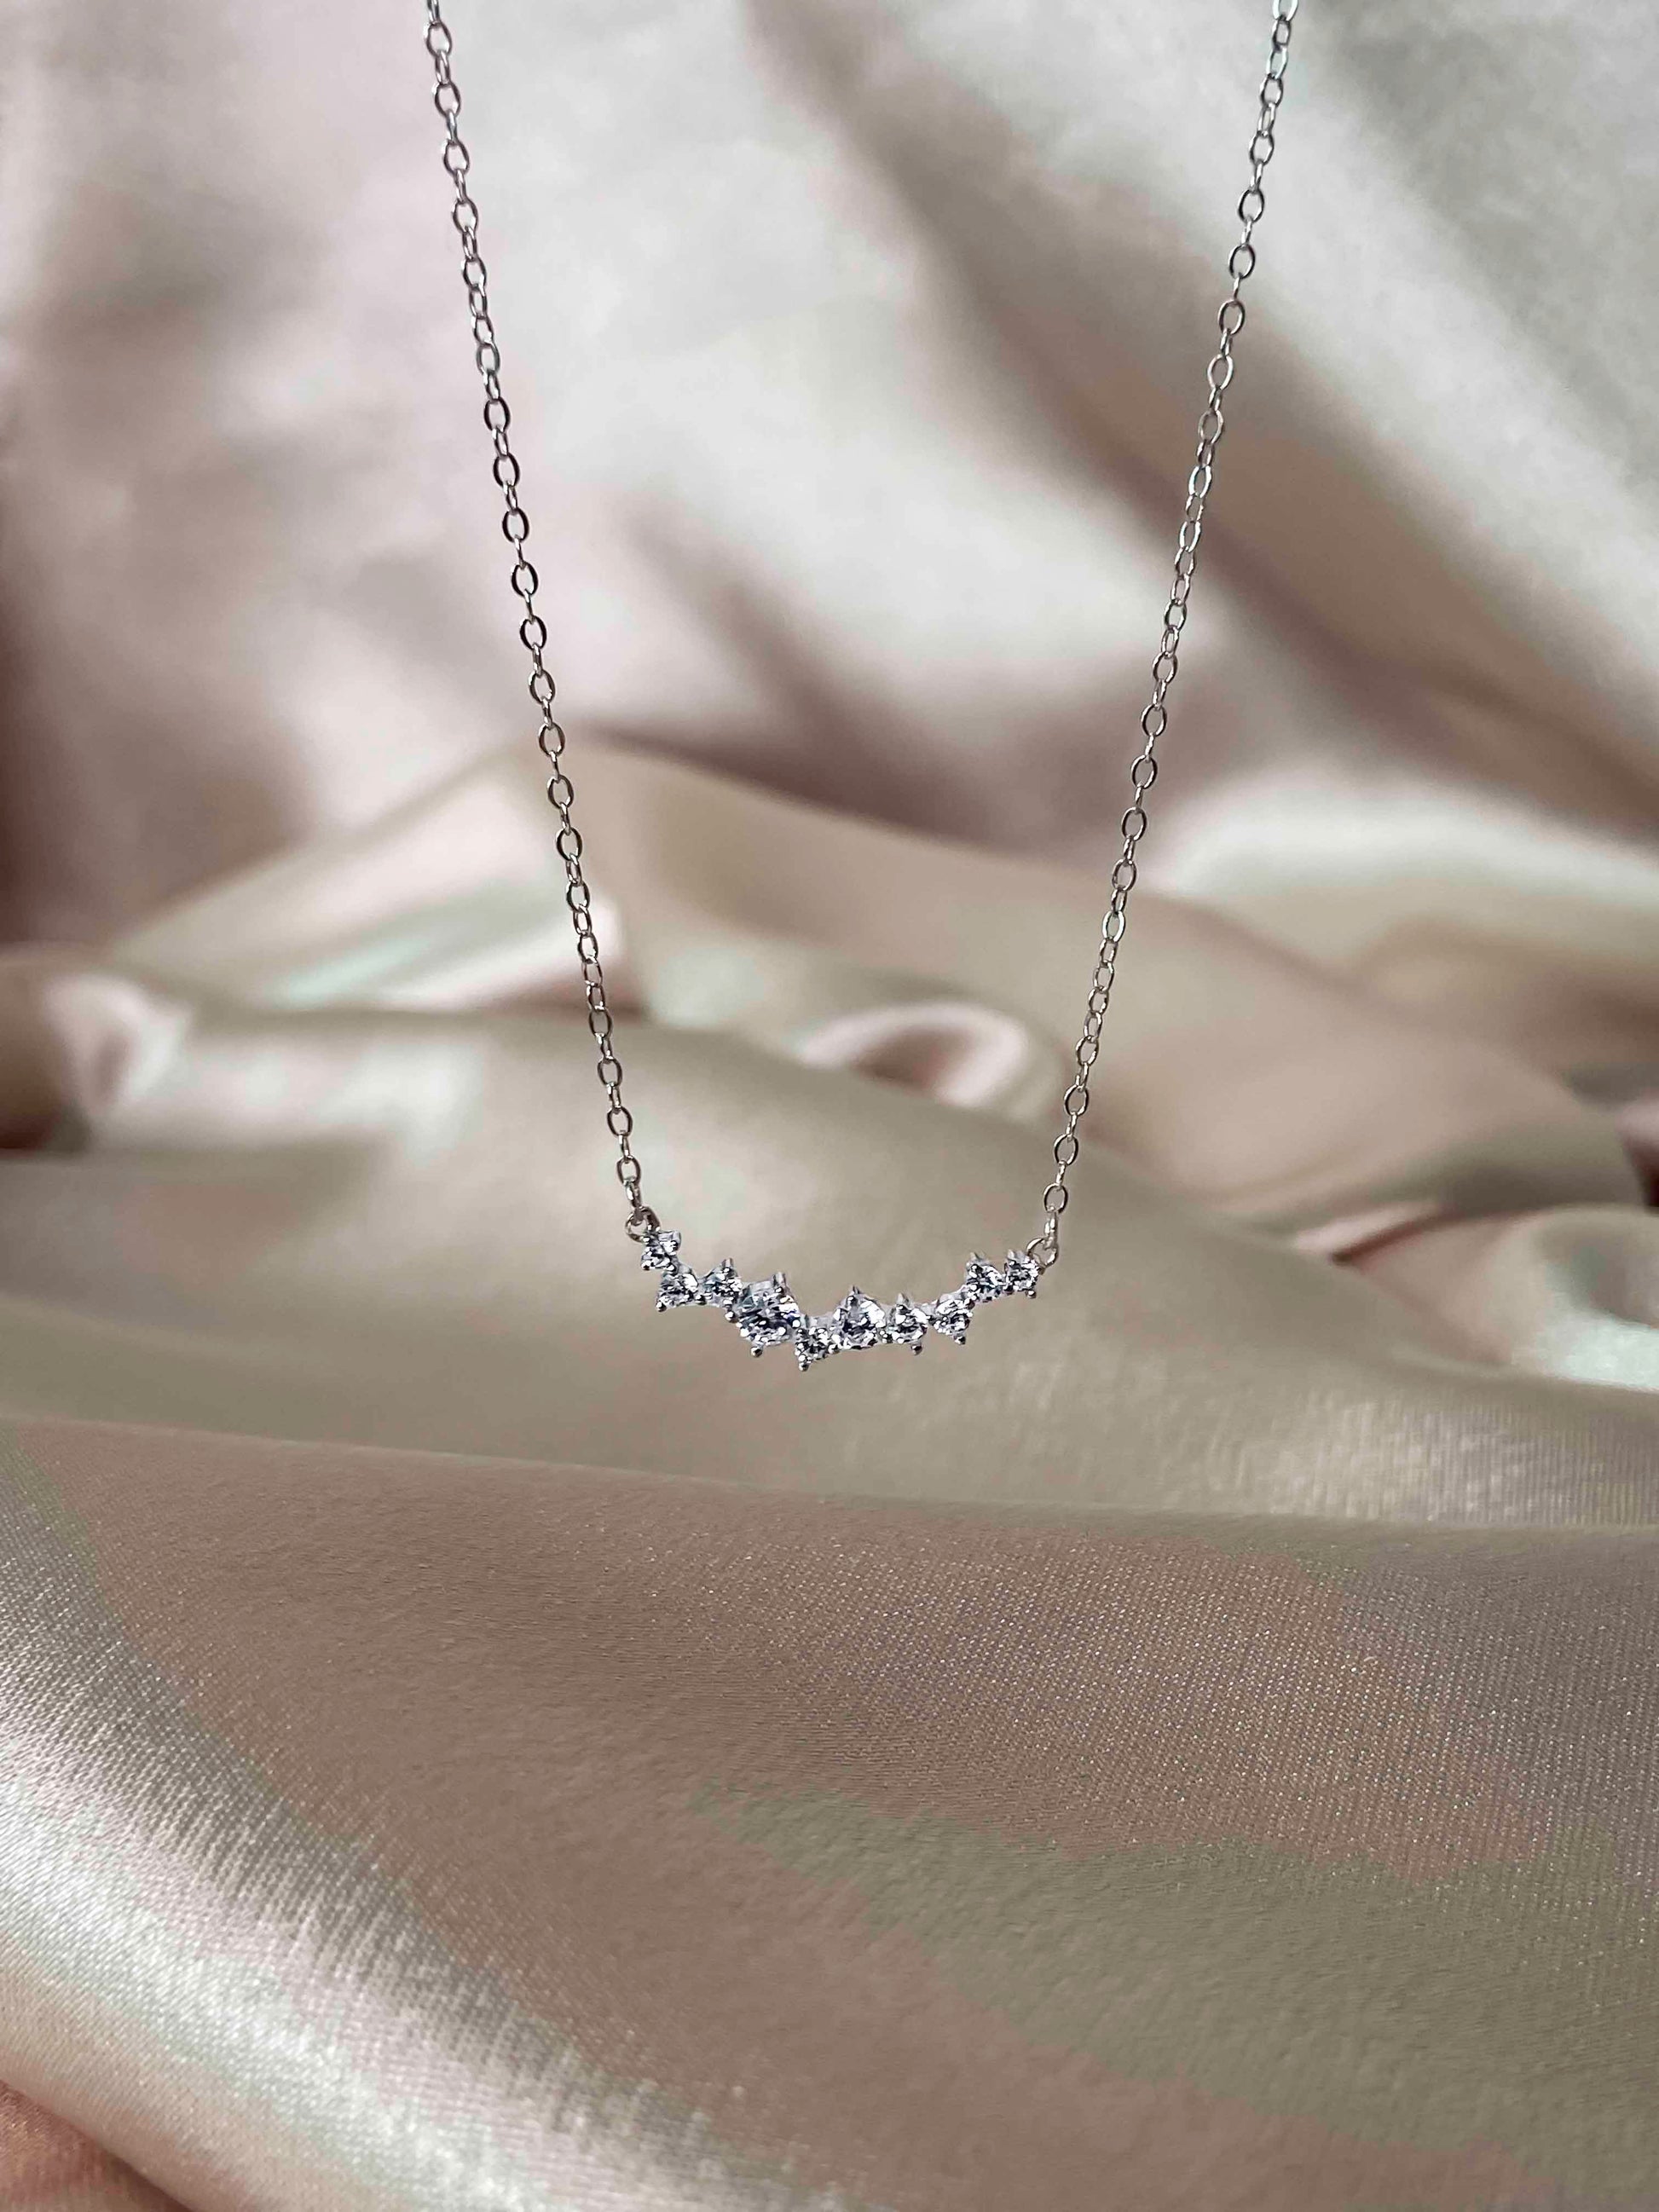 Handcrafted 925 sterling silver pave zircon pendant necklaces.